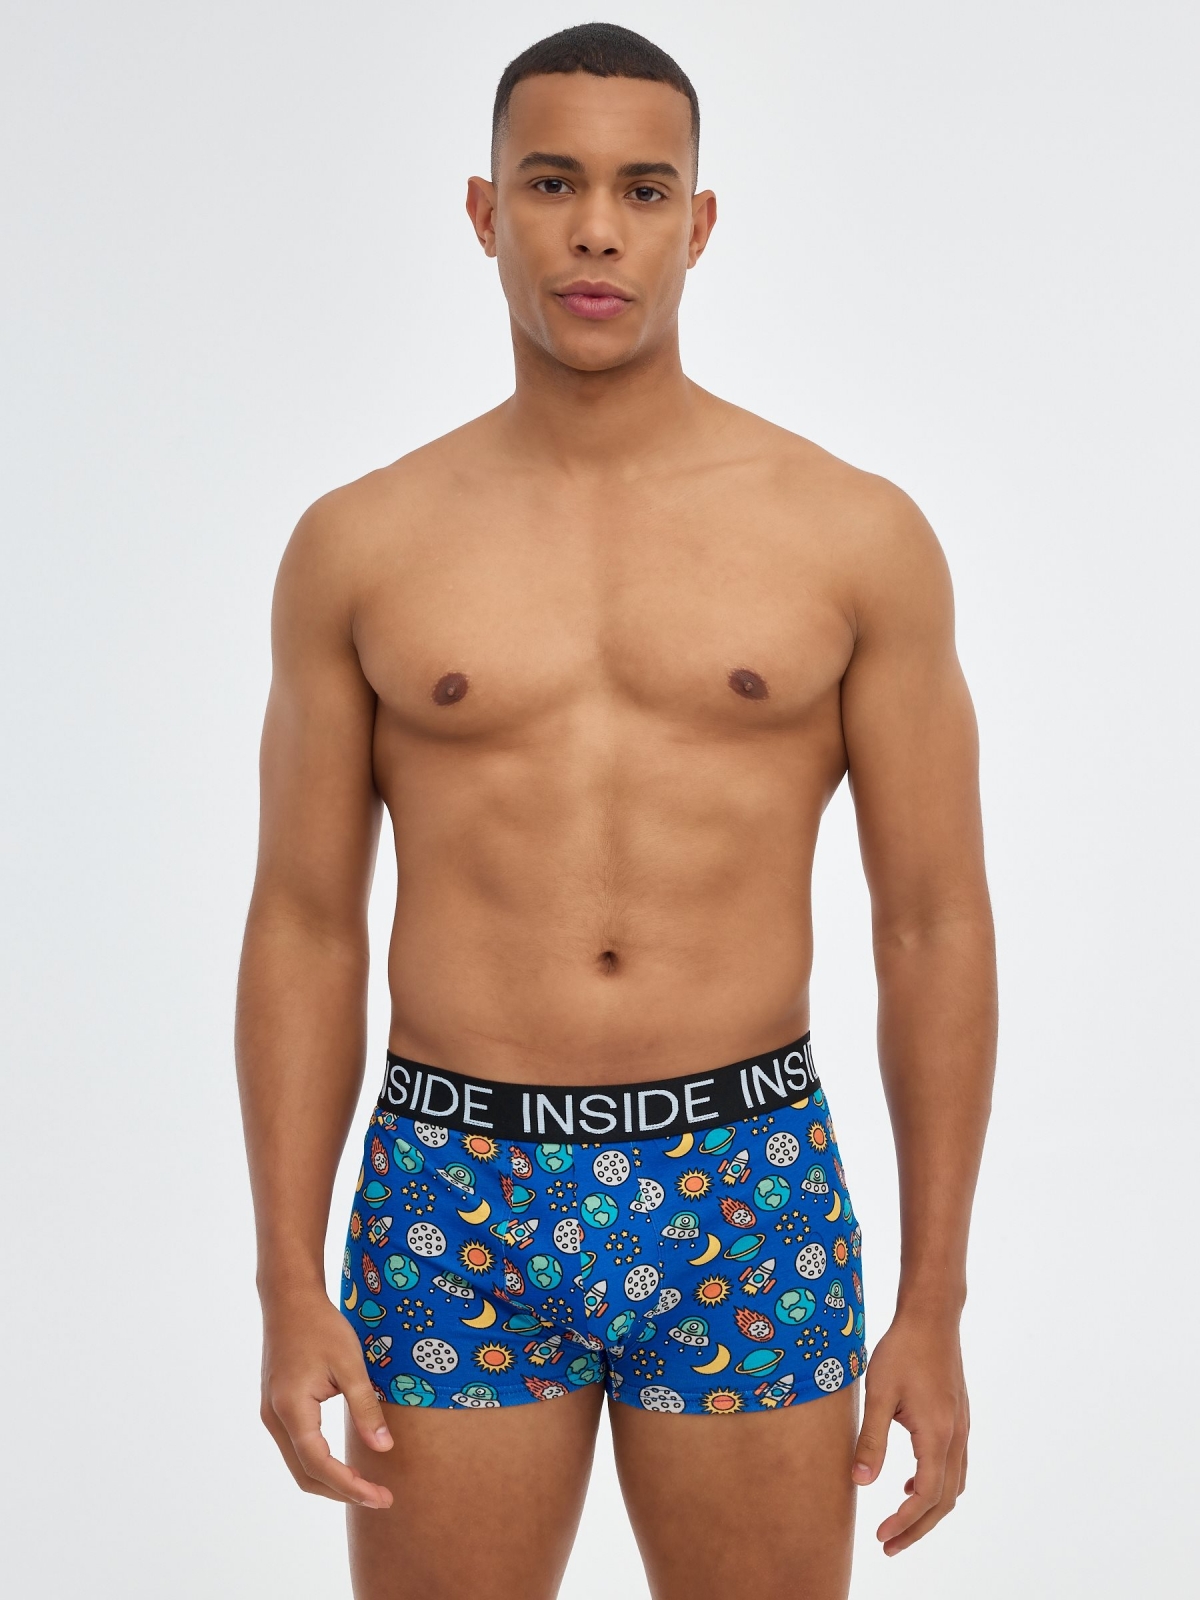 Boxer briefs print pack 3 front view